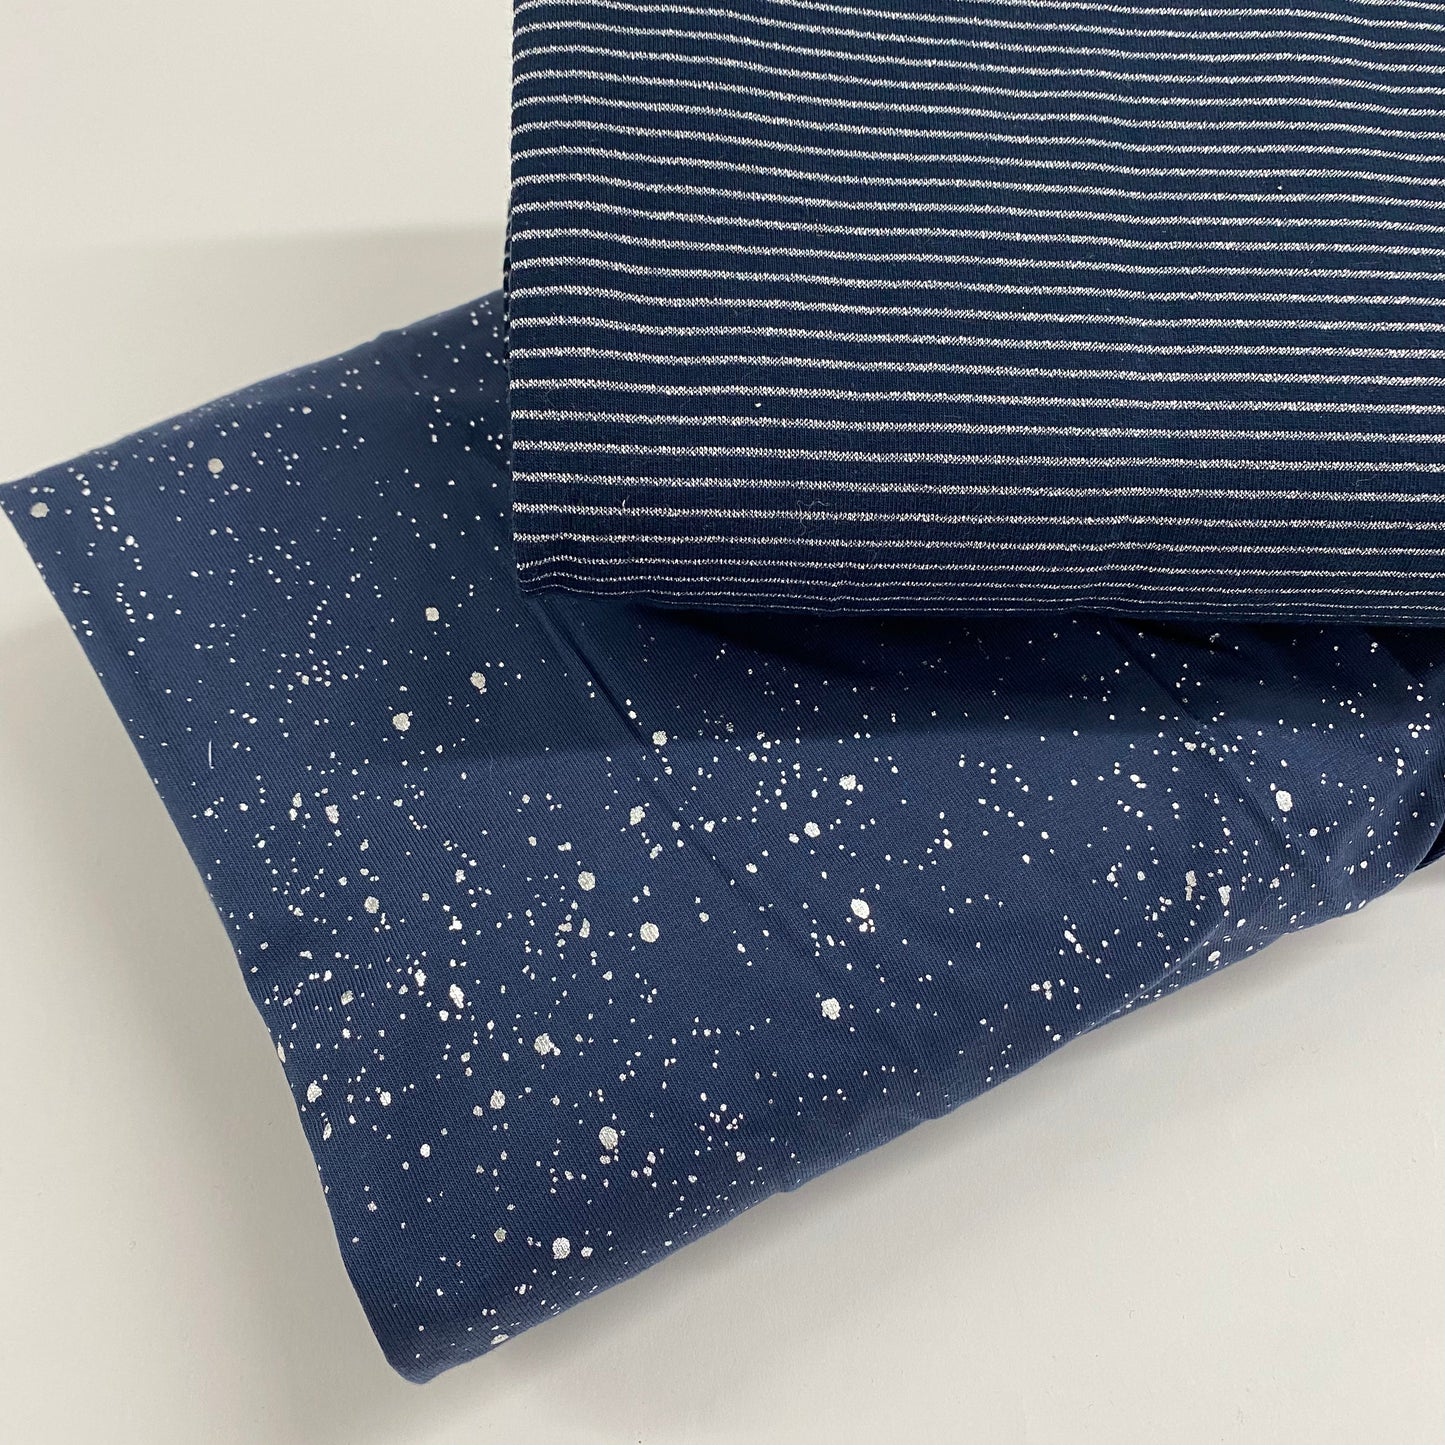 Striped Sparkly Navy Cotton Jersey Fabric 3.2m